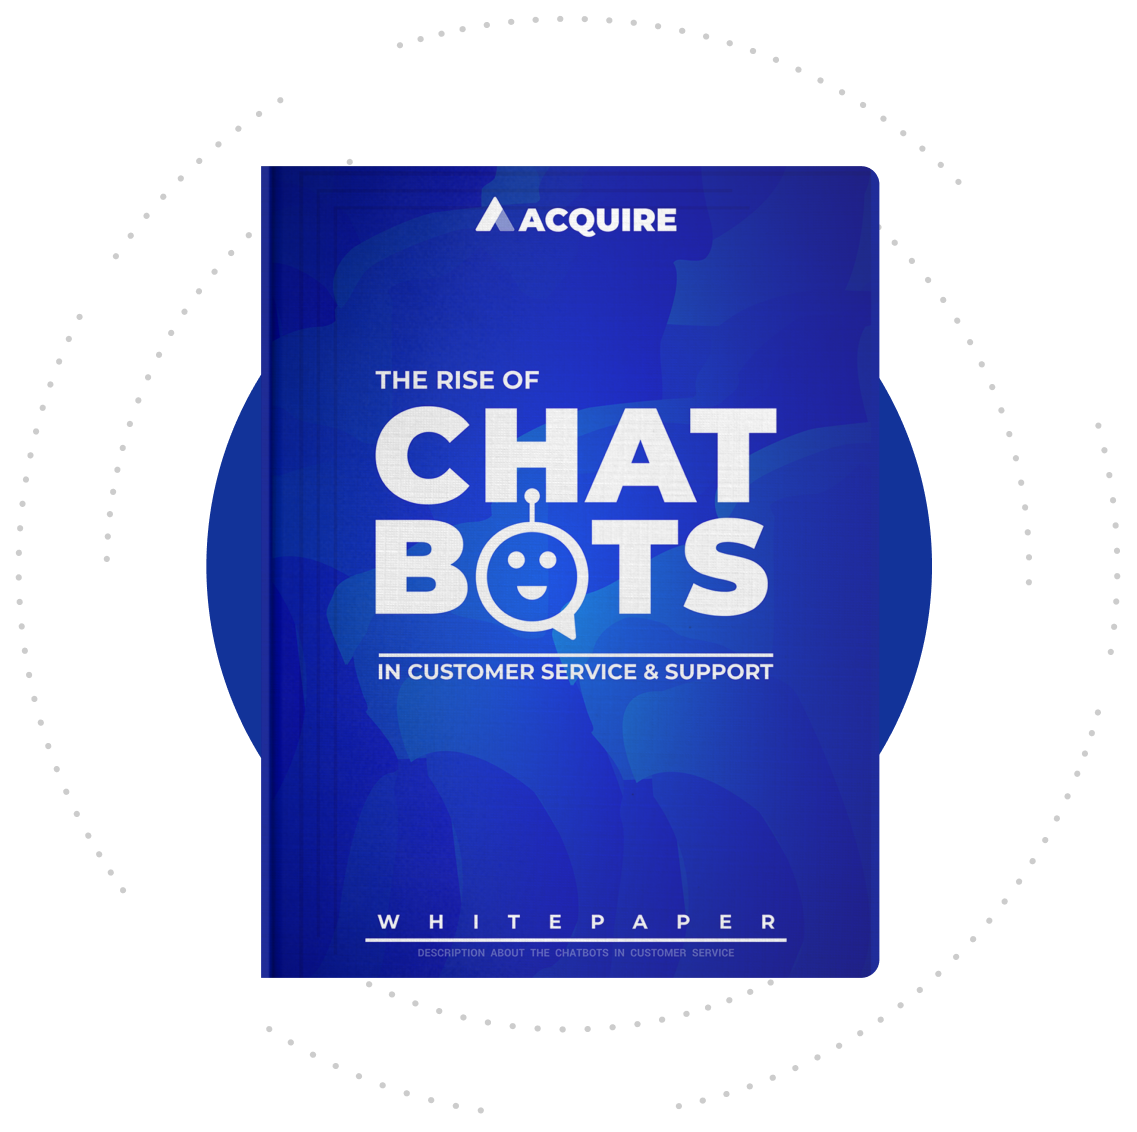 The Rise of Chatbots whitepaper